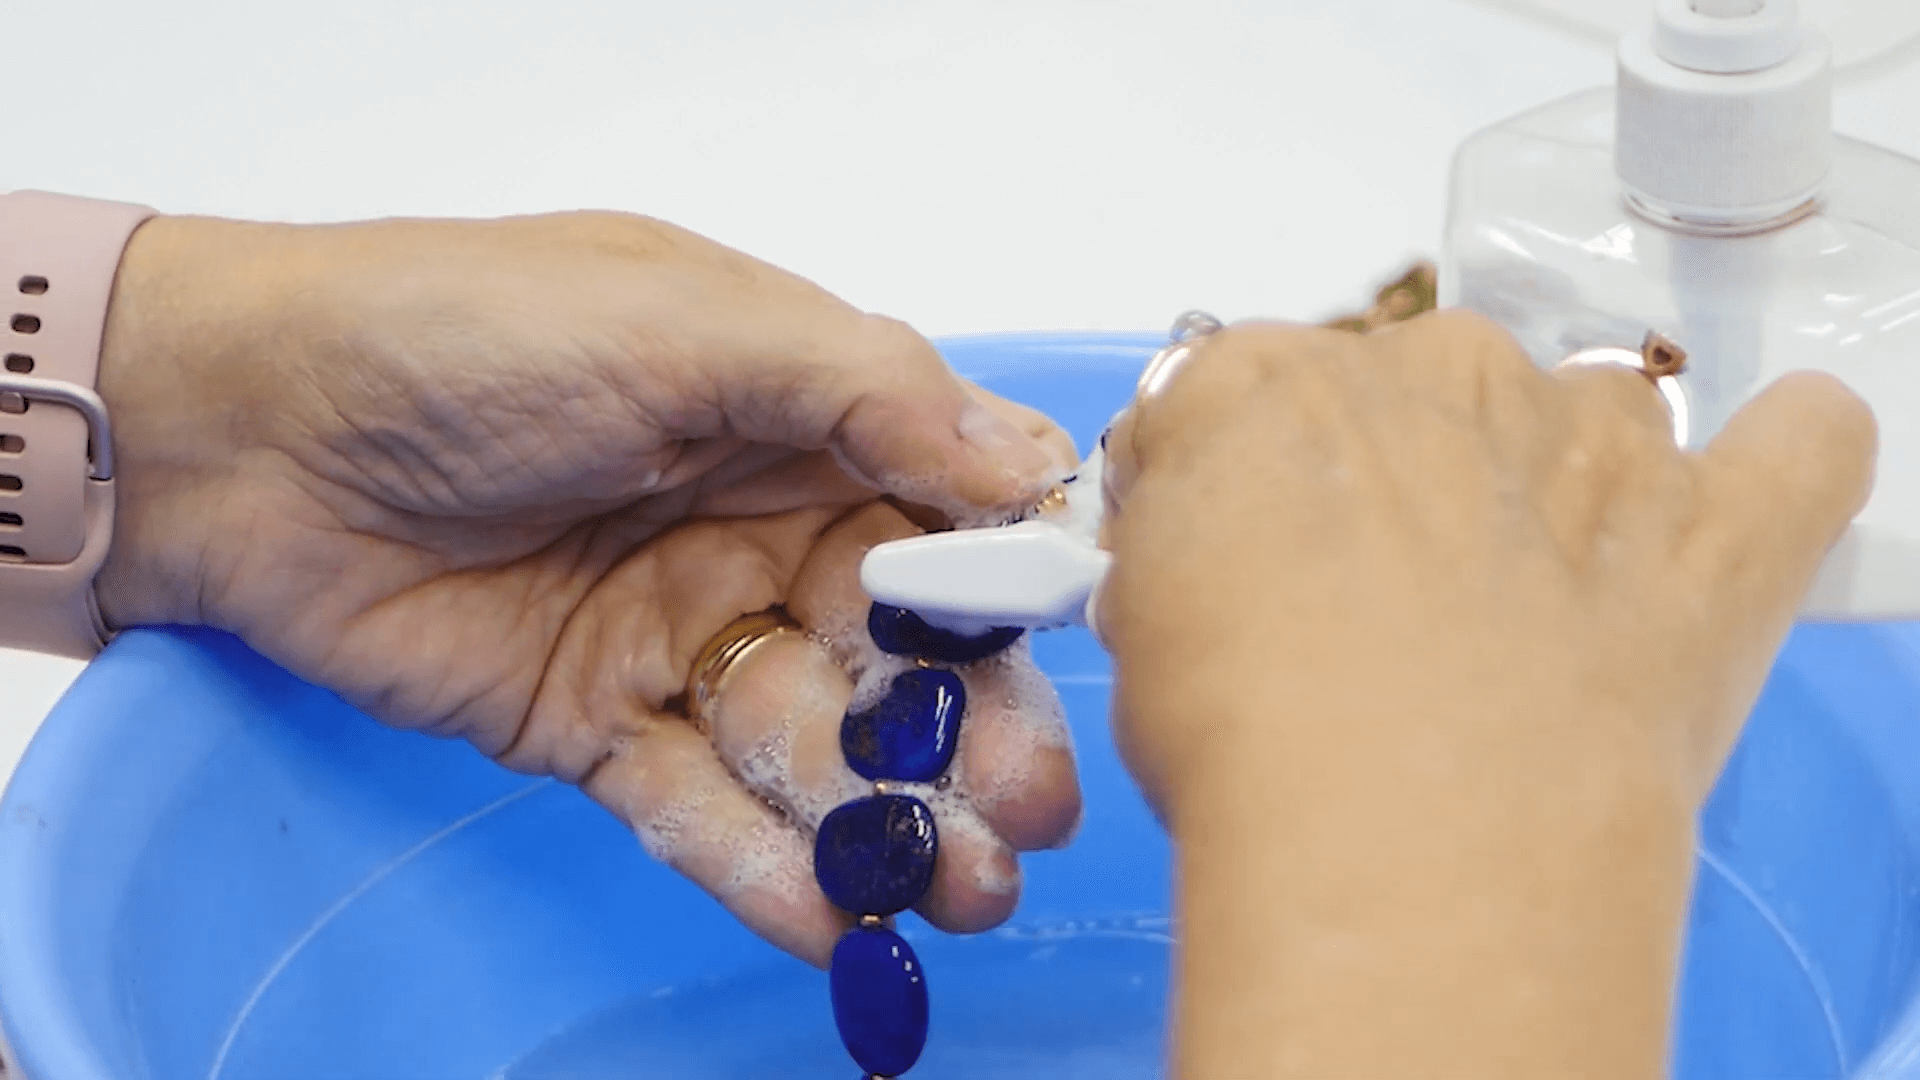 dipping and wetting a necklace